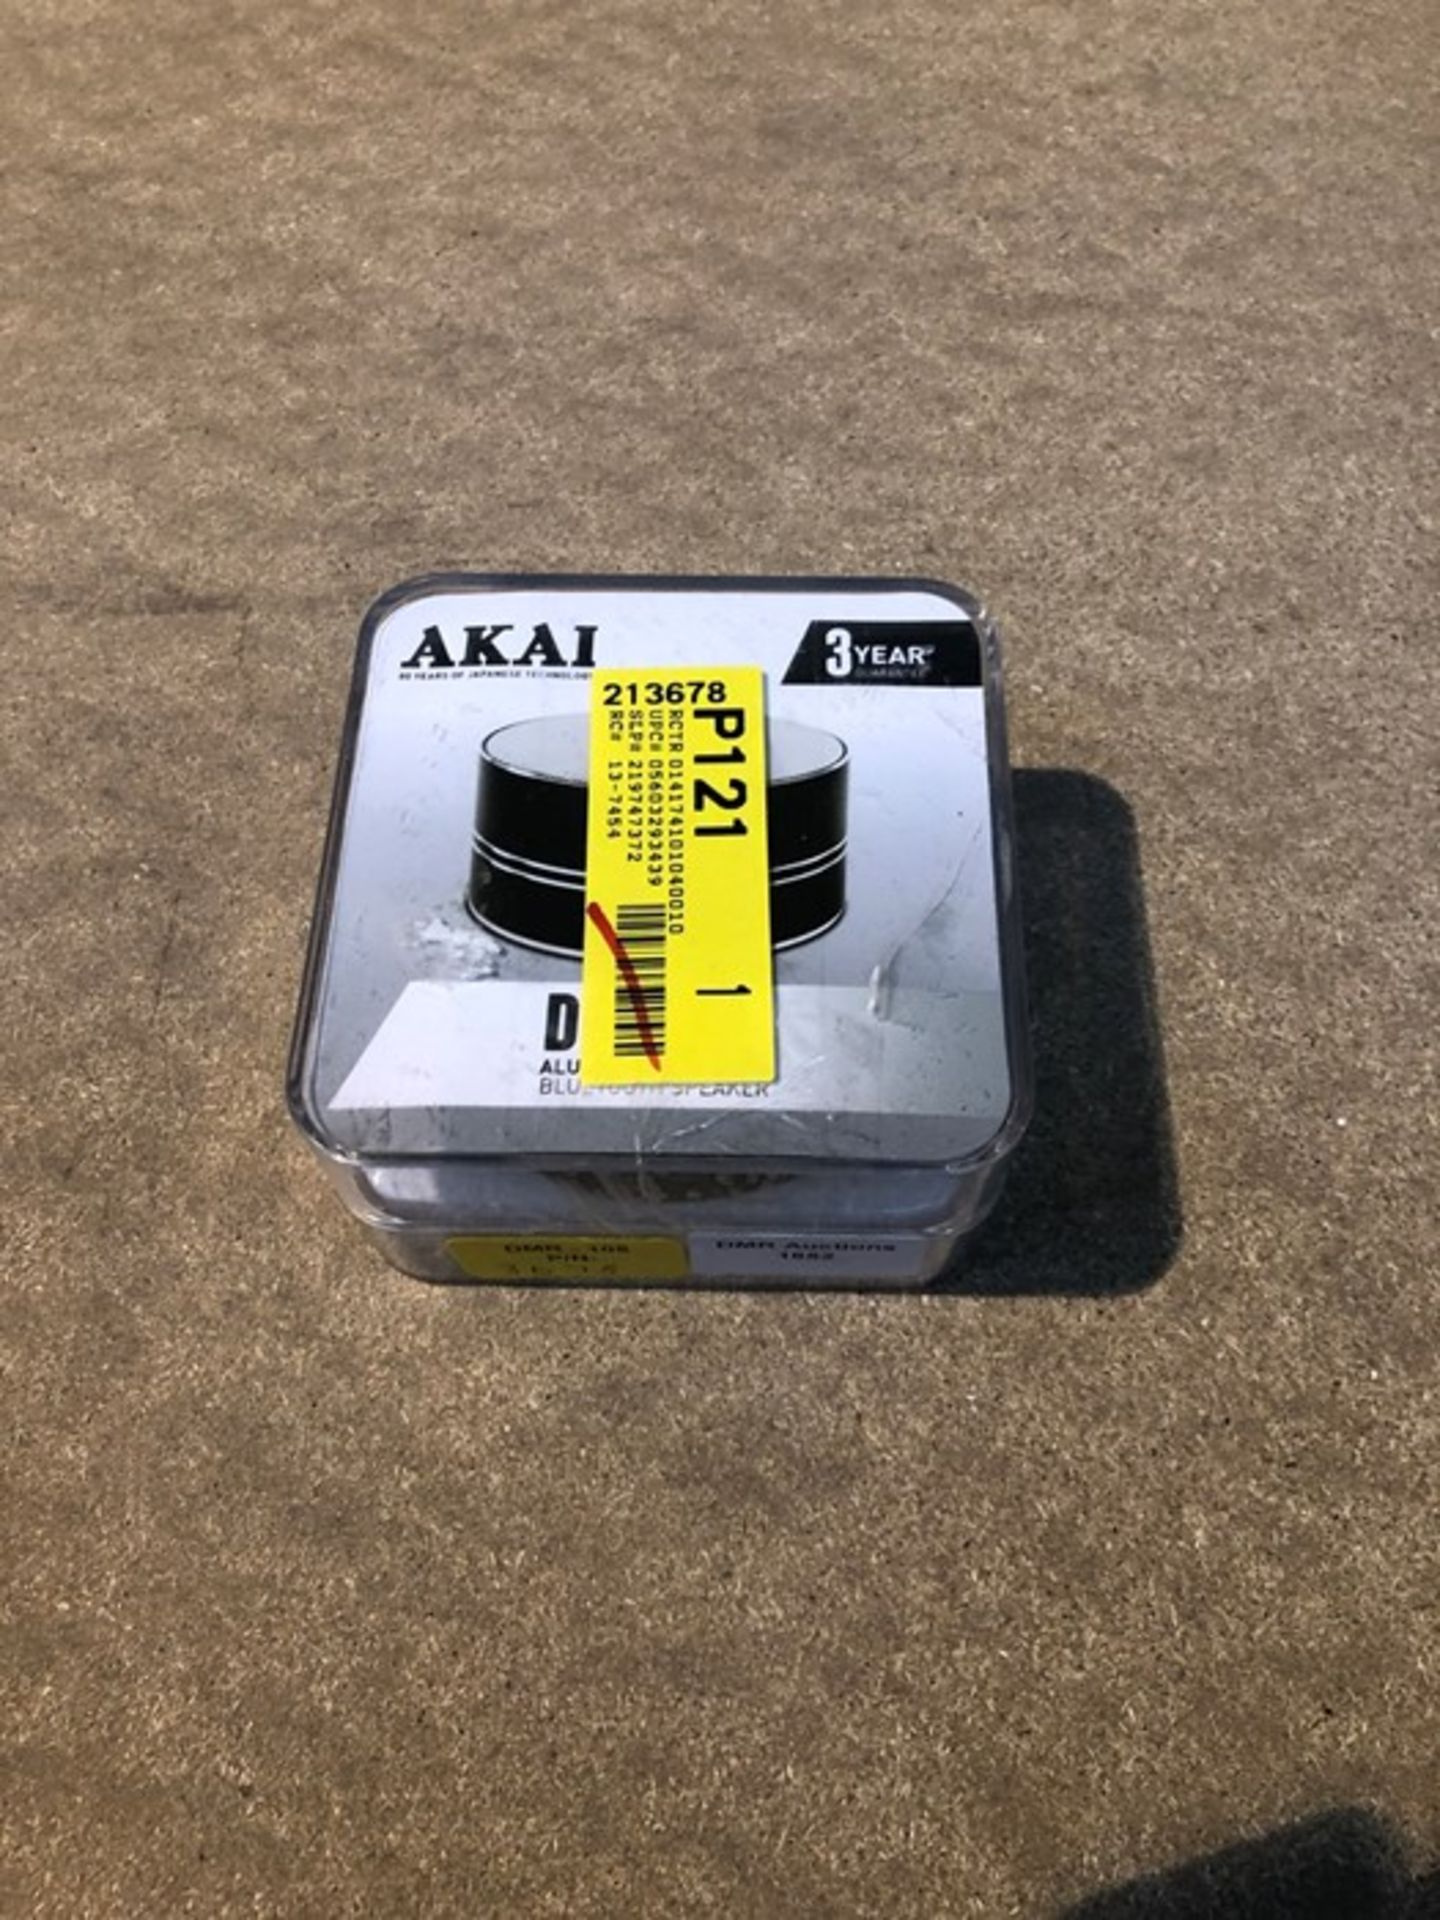 1 BOXED AKAI DYNMX ALUMINIUM CYLINDER BLUETOOTH SPEAKER IN BLACK / RRP £19.99 - BL -3678 (VIEWING